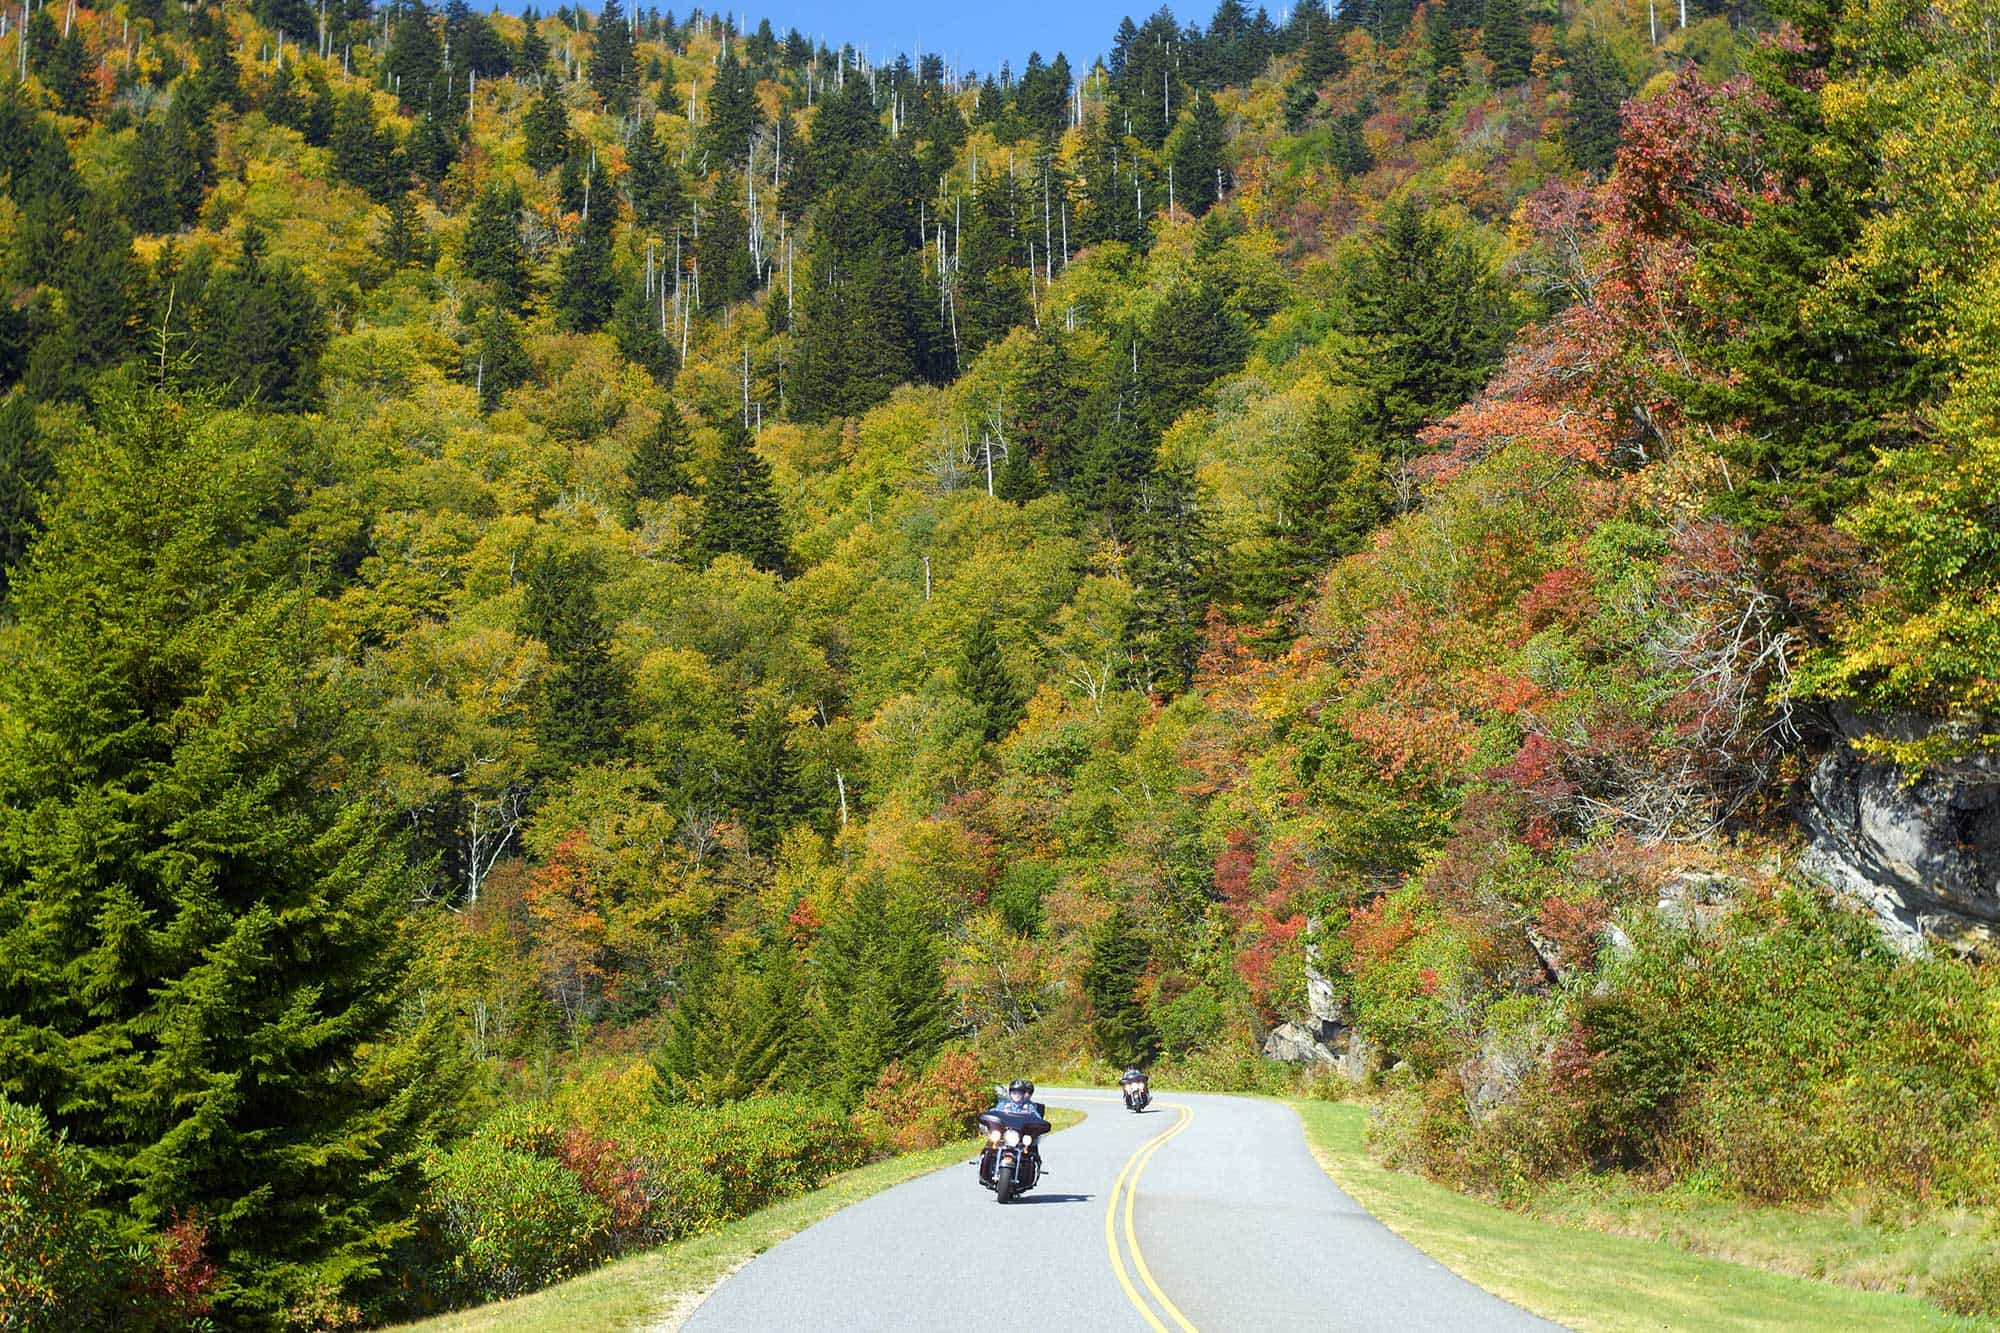 Some tips for organizing a great motorcycle vacation